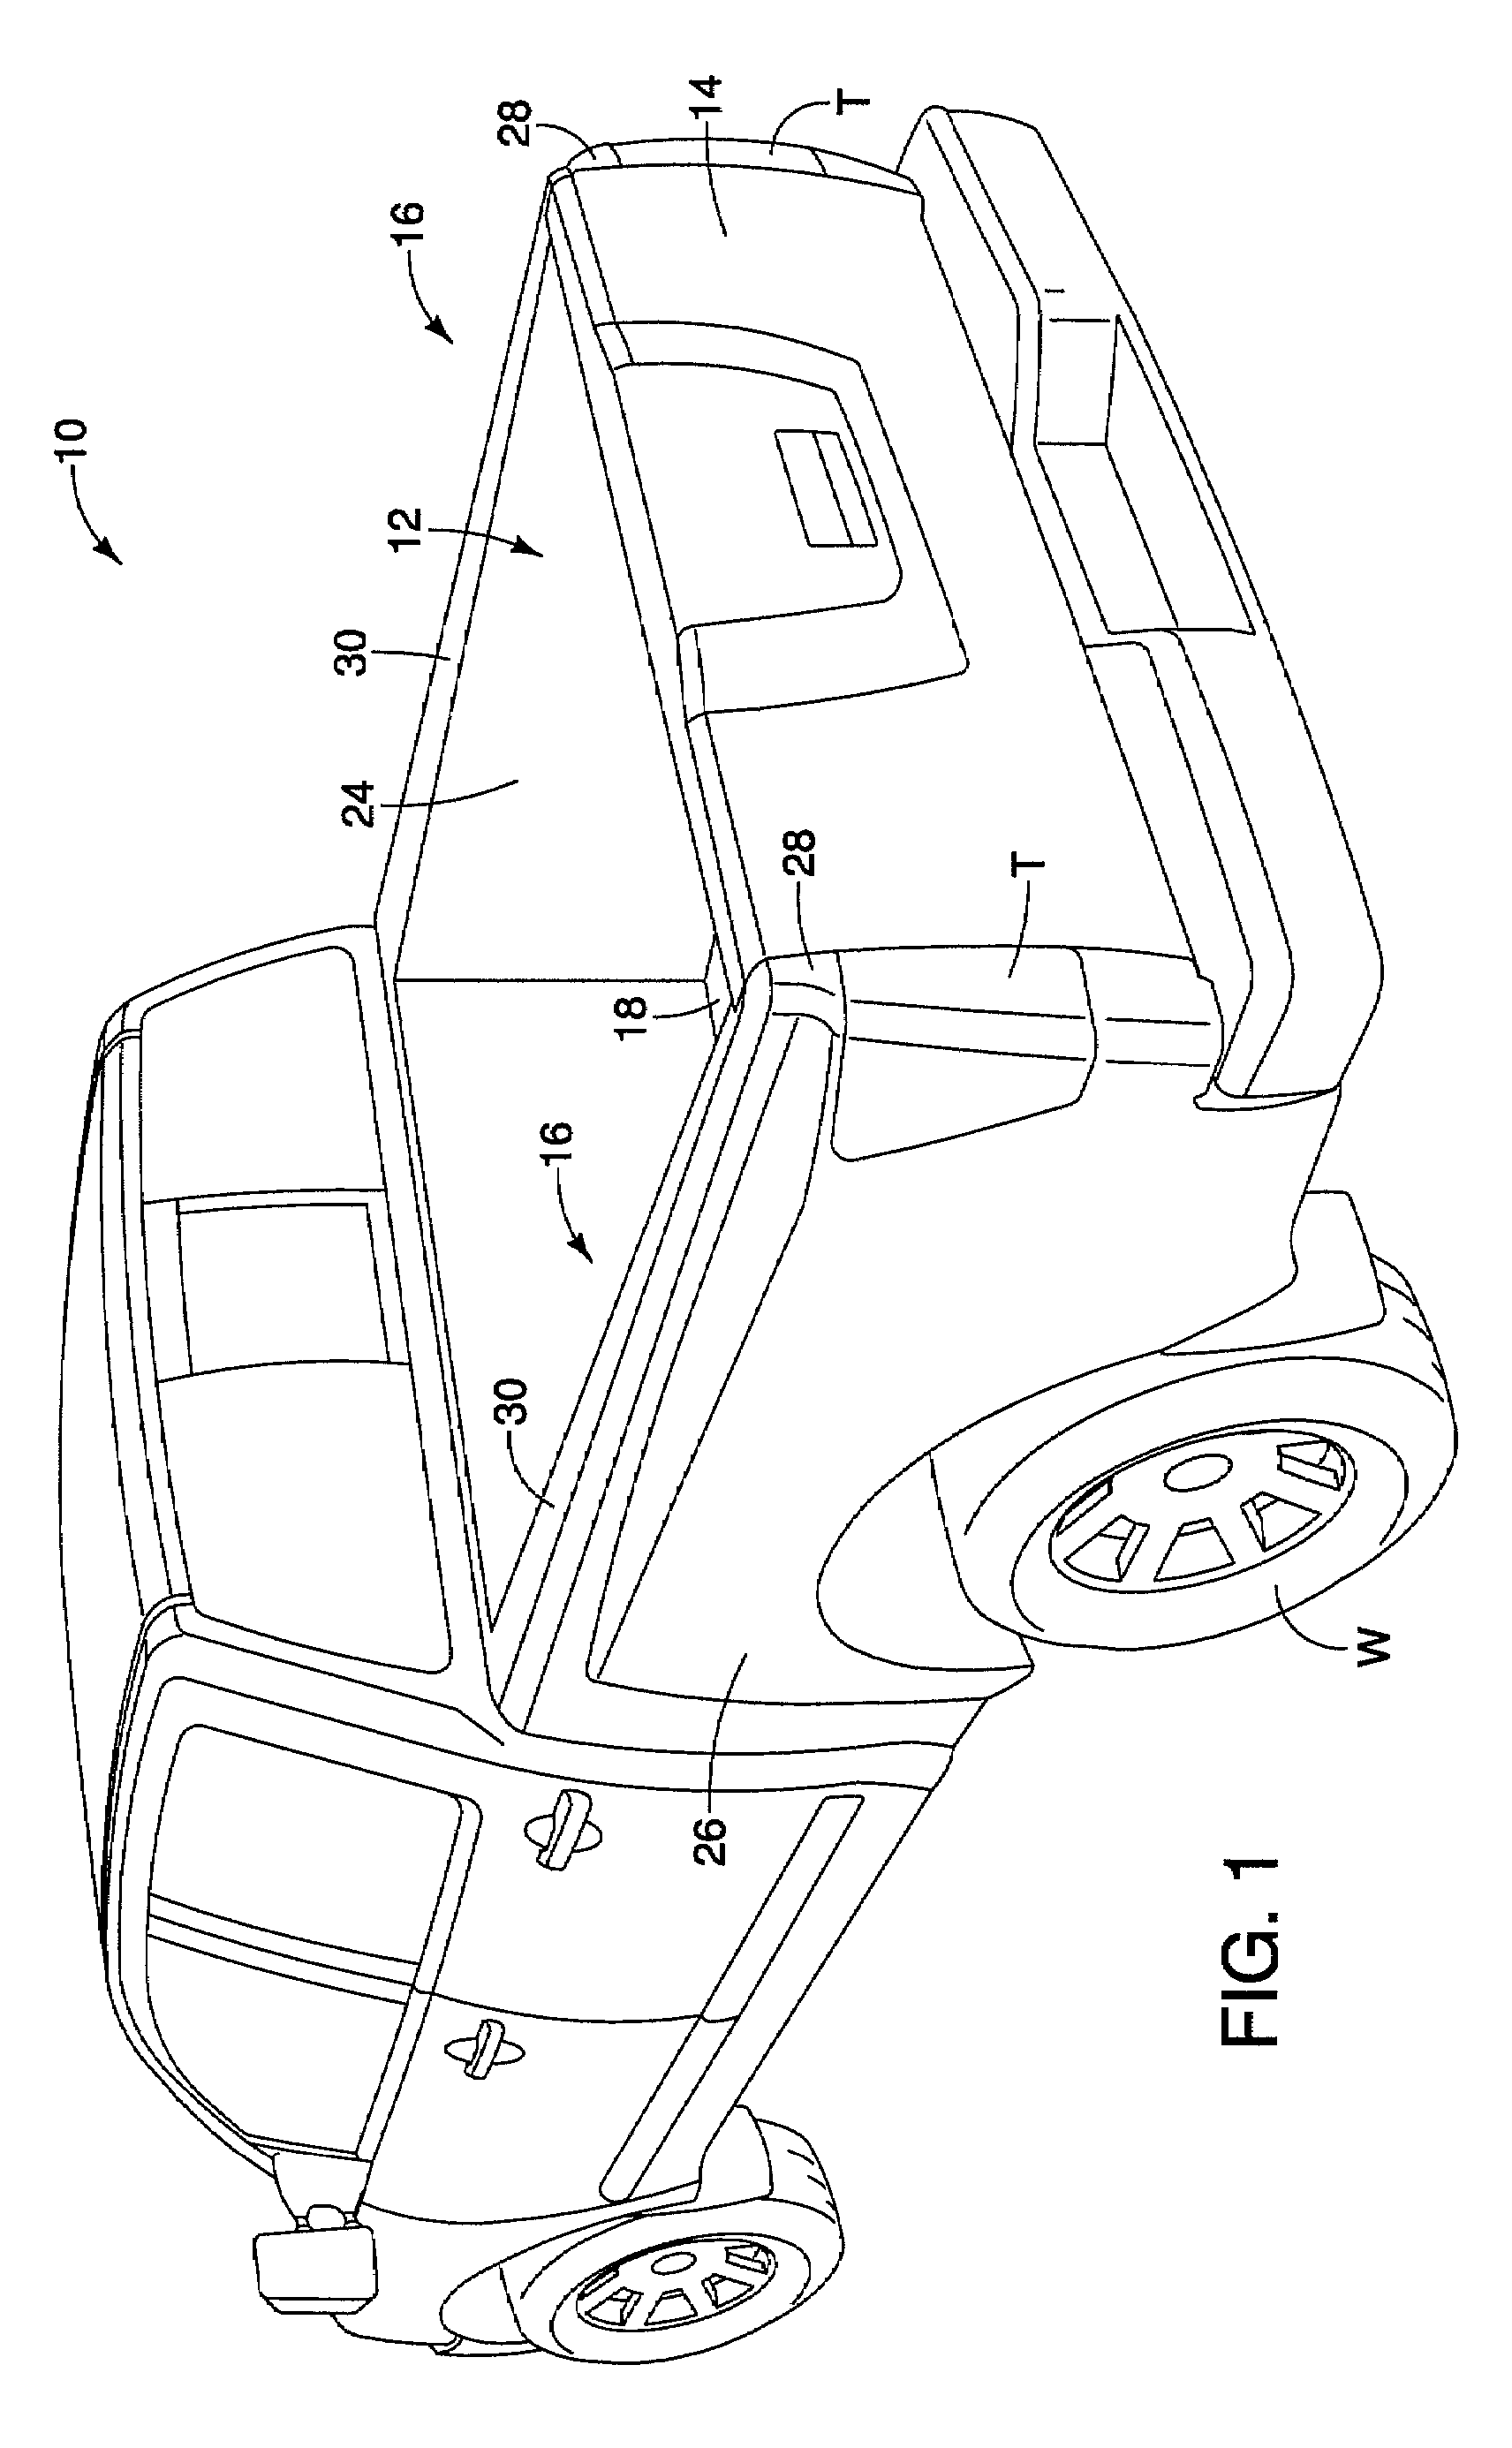 Vehicle cargo sidewall structure